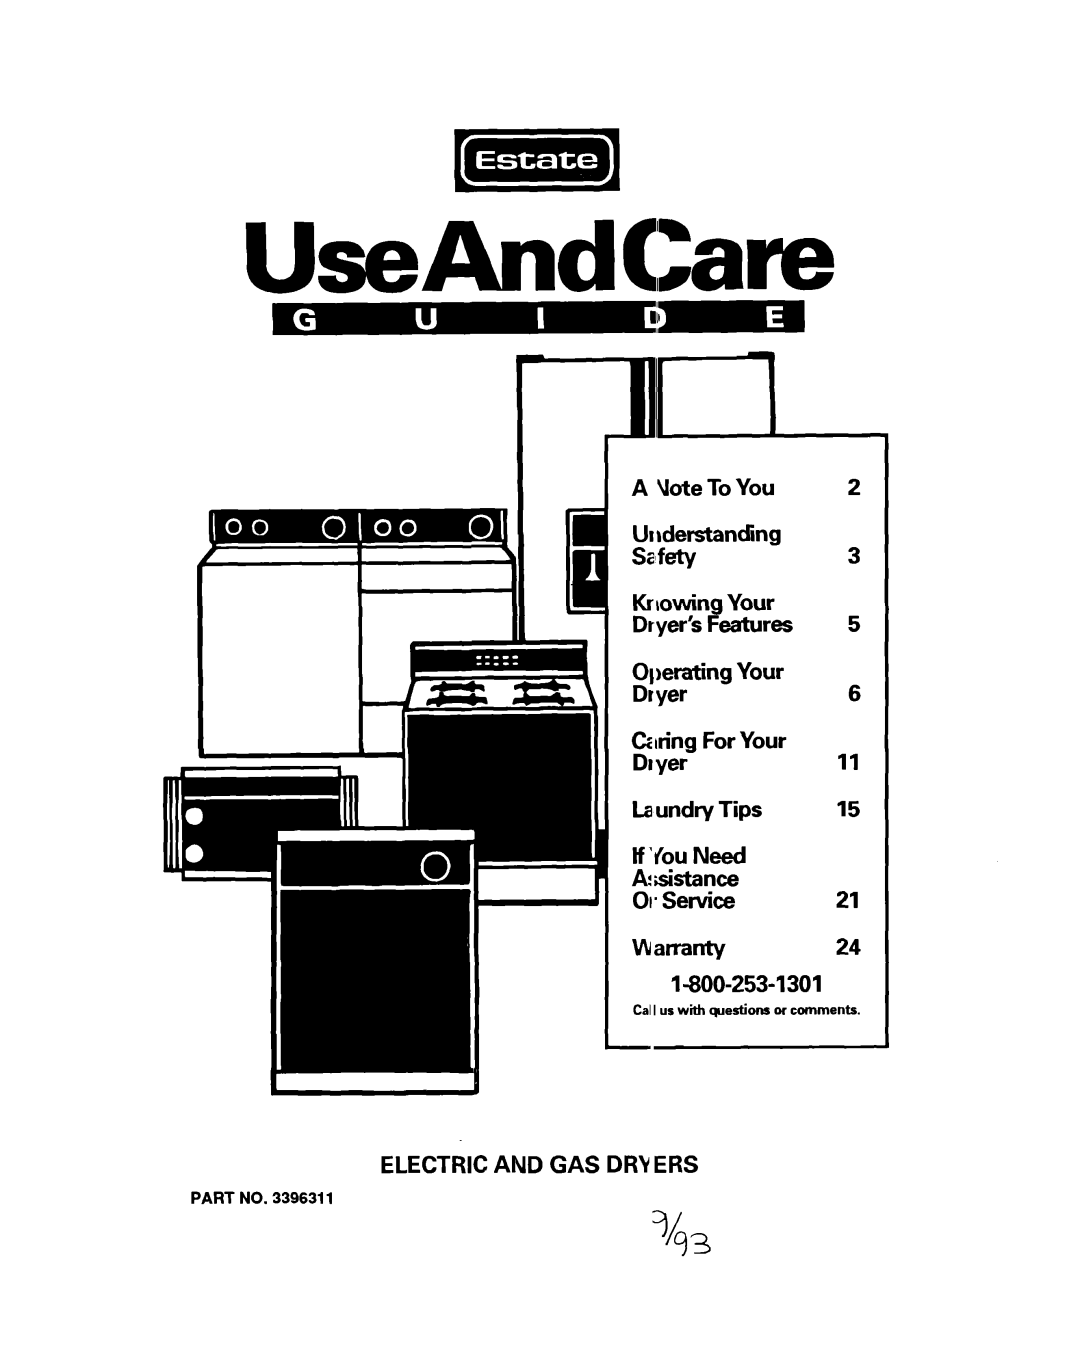 Whirlpool 3396311 manual UseAndCare, A Uote To You, Ut rderstanding Safety3 Knowing Your Dryer’s Features Operating Your 